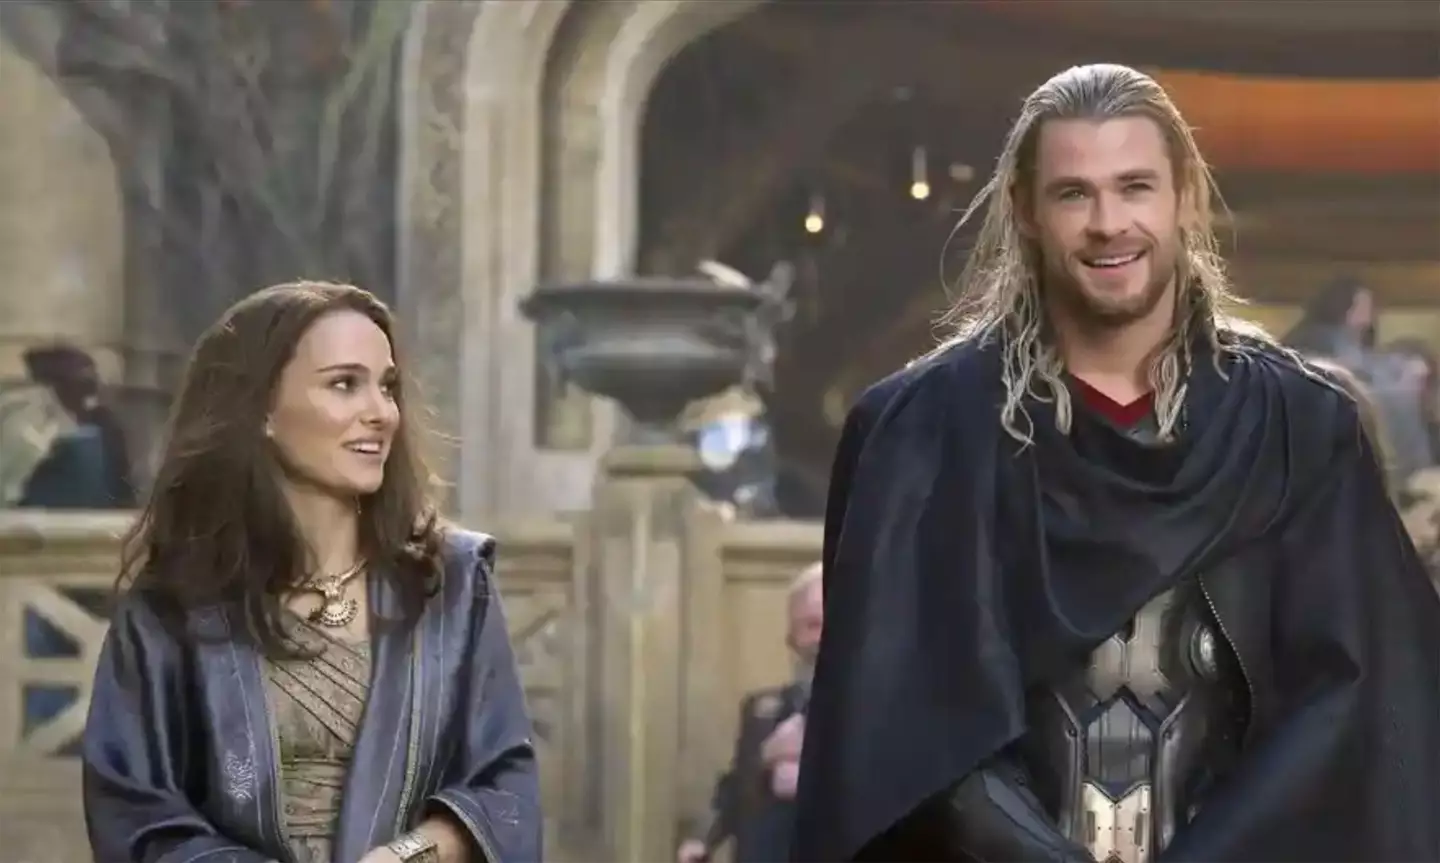 Portman is returning to the franchise for the first time since 2013’s Thor: The Dark World.